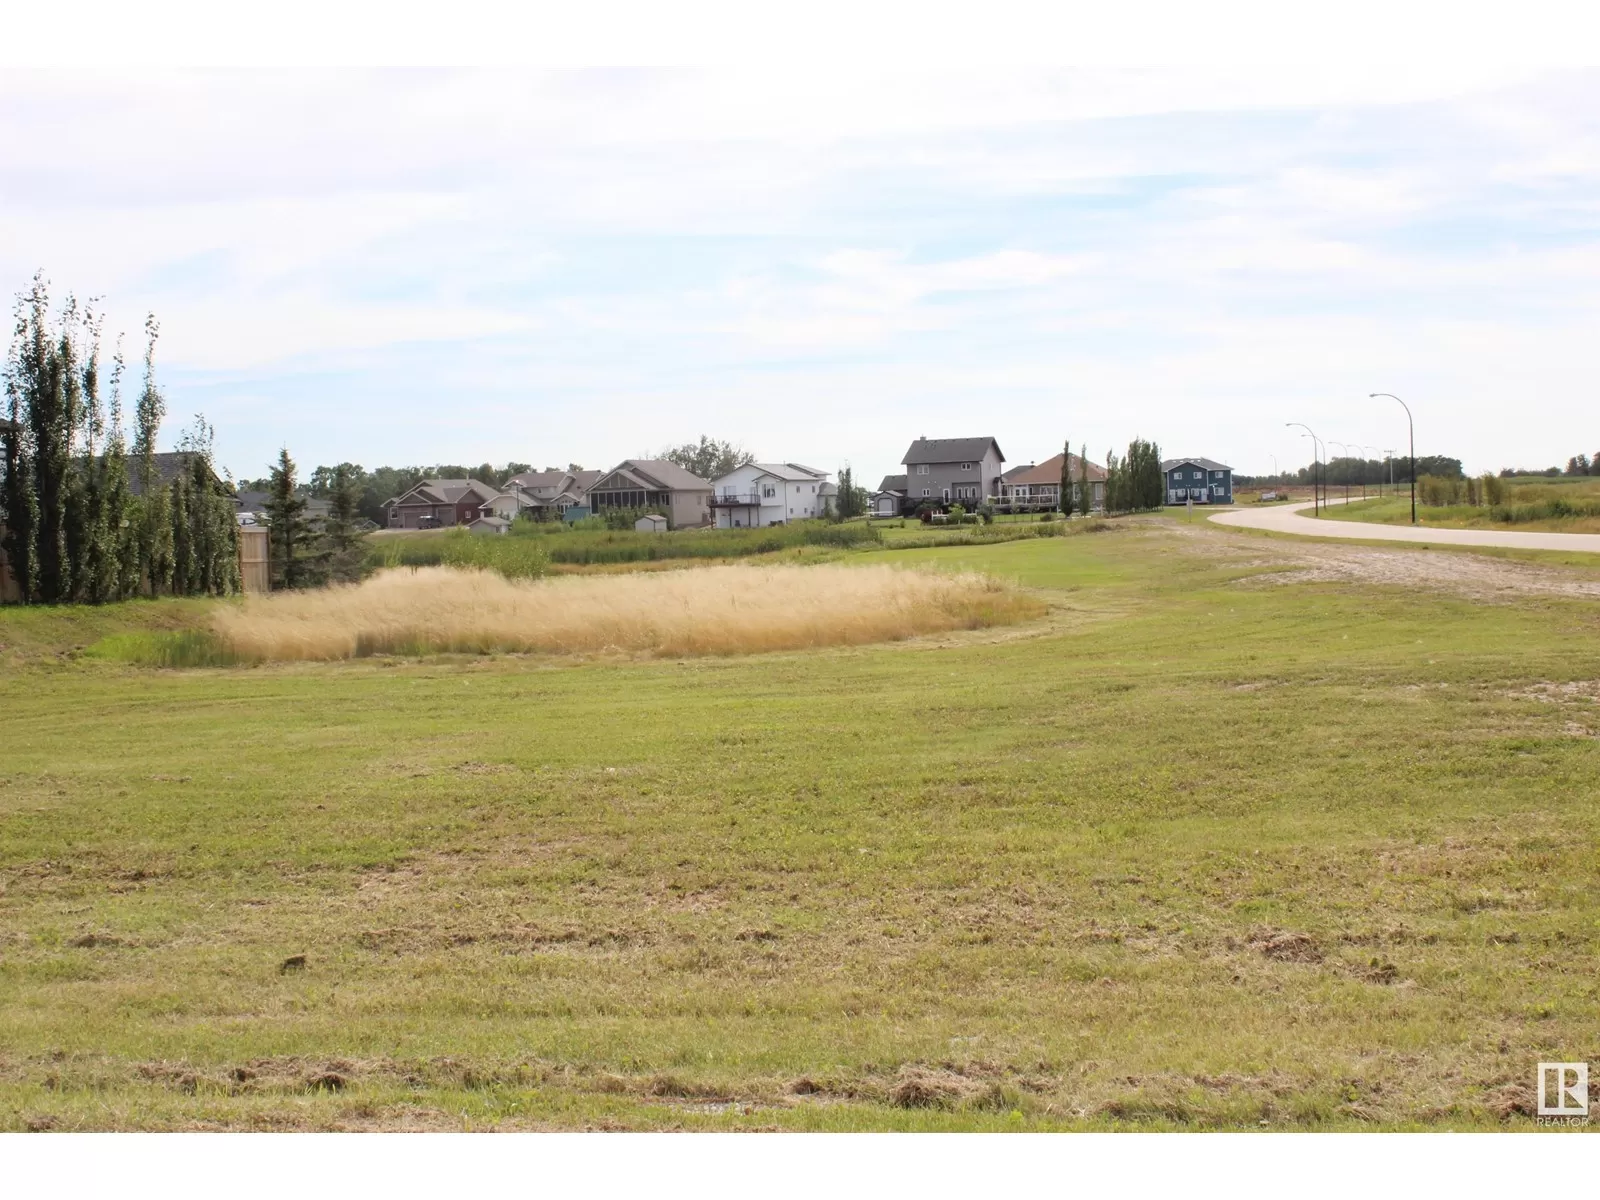 No Building for rent: 41 Whitetail Gr, Mundare, Alberta T0B 3H0